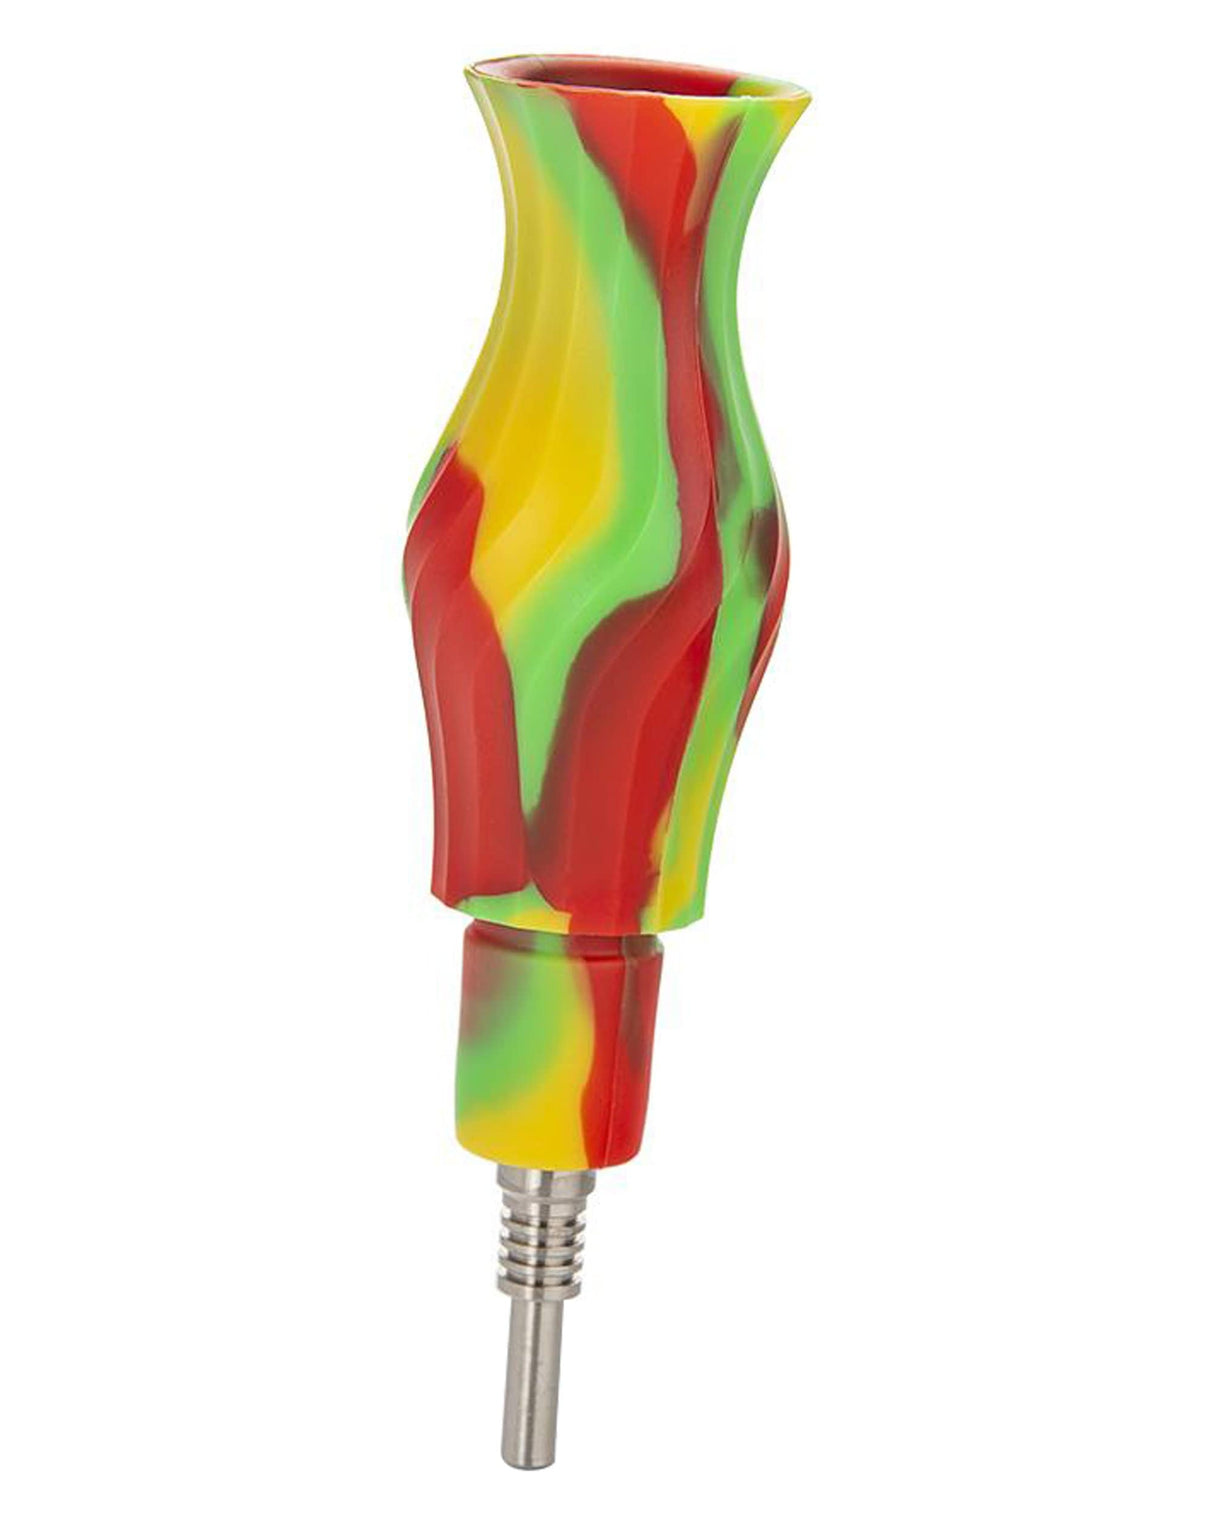 Ooze Echo Silicone Bong in vibrant red, yellow, and green with a 14mm joint, front view on white background